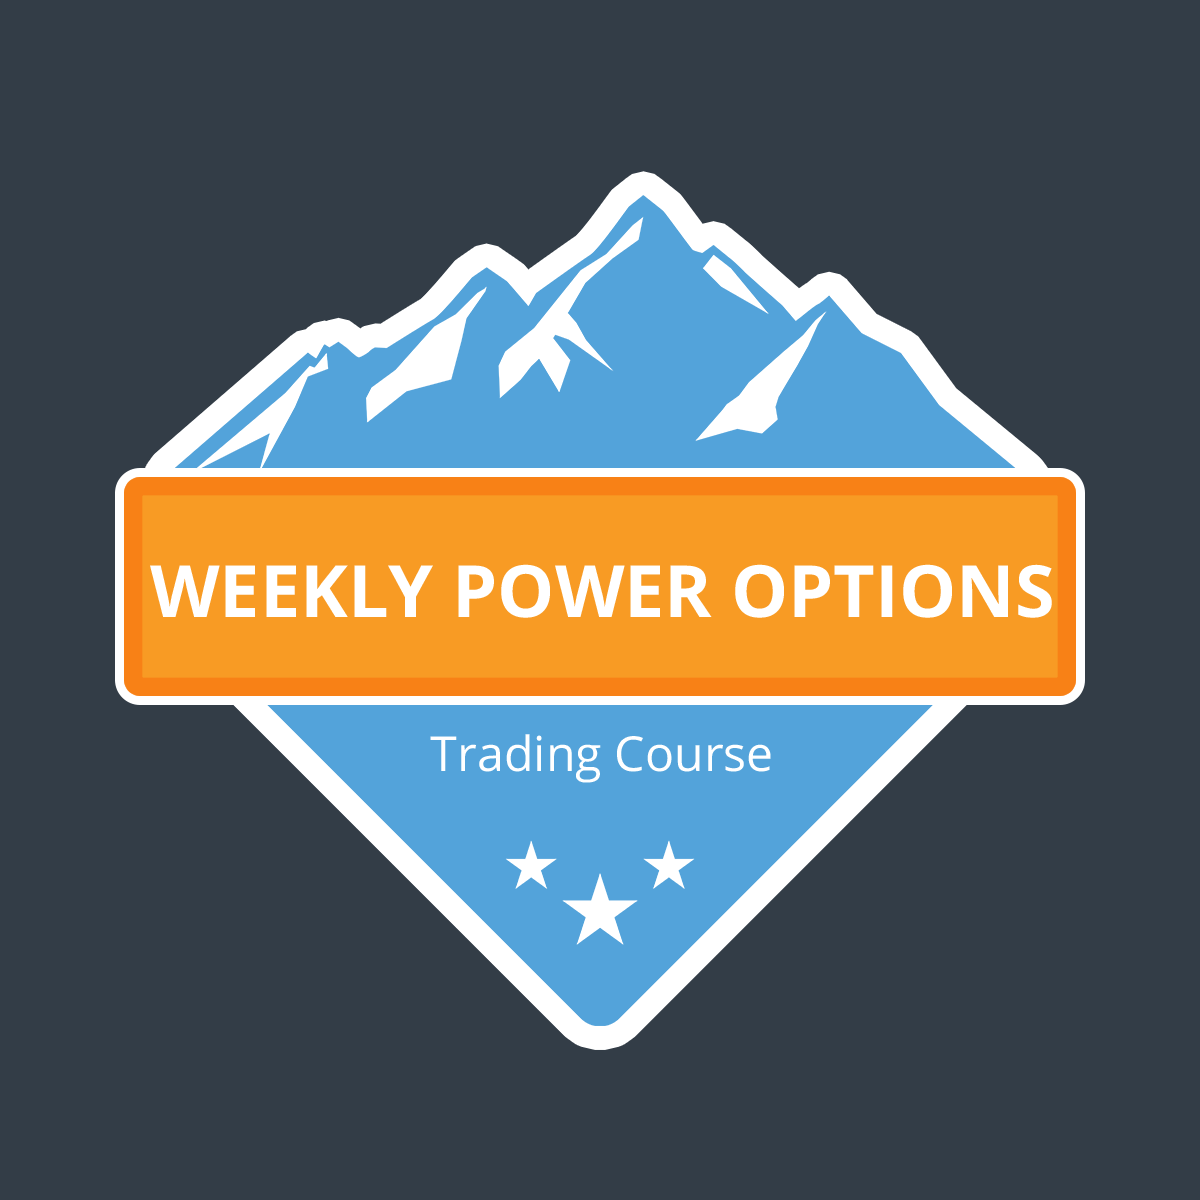 Weekly Power Options are coming next week!Learn how to maximize your Credit Spread Trading At tenco.pro